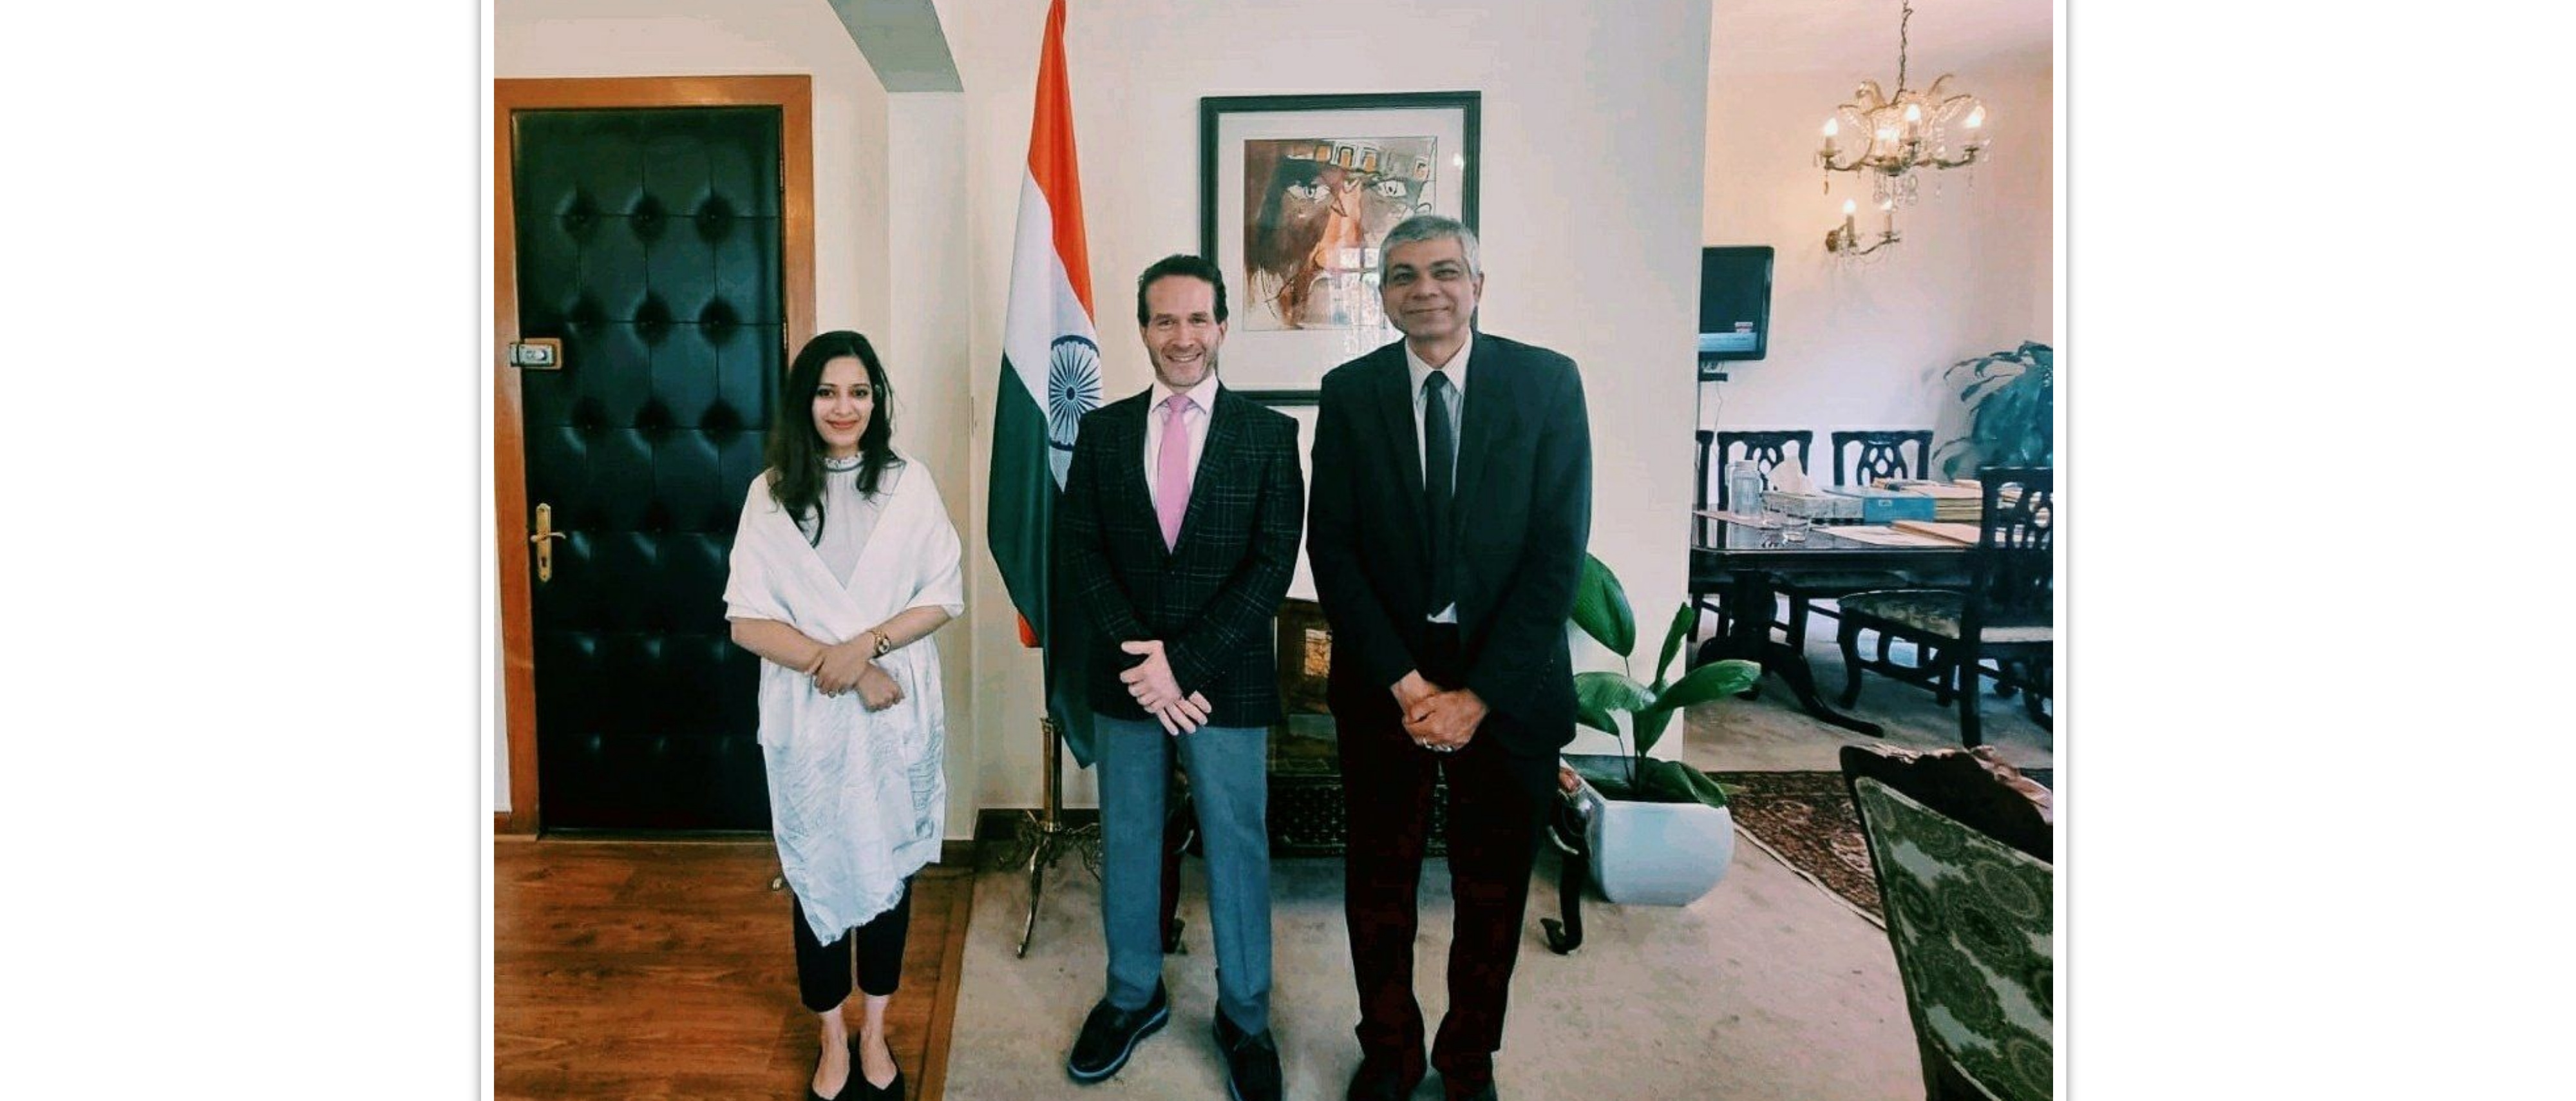  <div style="fcolor: #fff; font-weight: 600; font-size: 1.5em;">
<p style="font-size: 13.8px;">Ambassador Pankaj Sharma & Second Secretary Vallari Gaikwad (Economic & Commercial) met with the Director of Strategic International Relations at Tecnológico de Monterrey Ambassador Mr.Nathan Wolf.

Their discussions included a follow up on enhancing collaboration between Indian academic institutes & Tec de Monterrey. 
<br /><span style="text-align: center;">11 May 2022</span></p>
</div>
